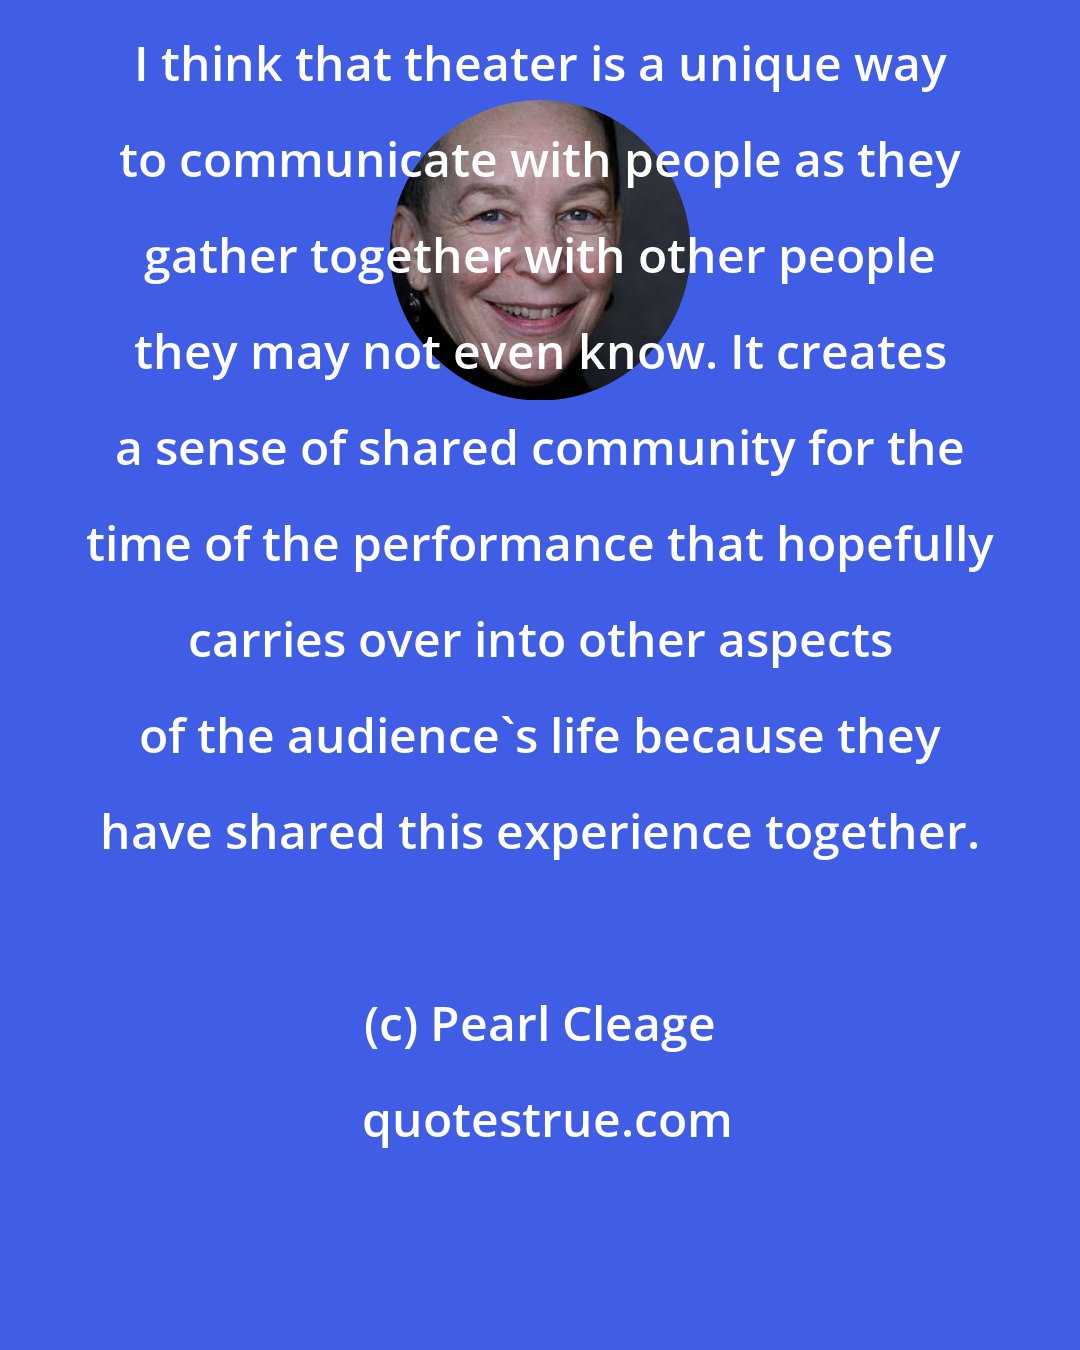 Pearl Cleage: I think that theater is a unique way to communicate with people as they gather together with other people they may not even know. It creates a sense of shared community for the time of the performance that hopefully carries over into other aspects of the audience's life because they have shared this experience together.